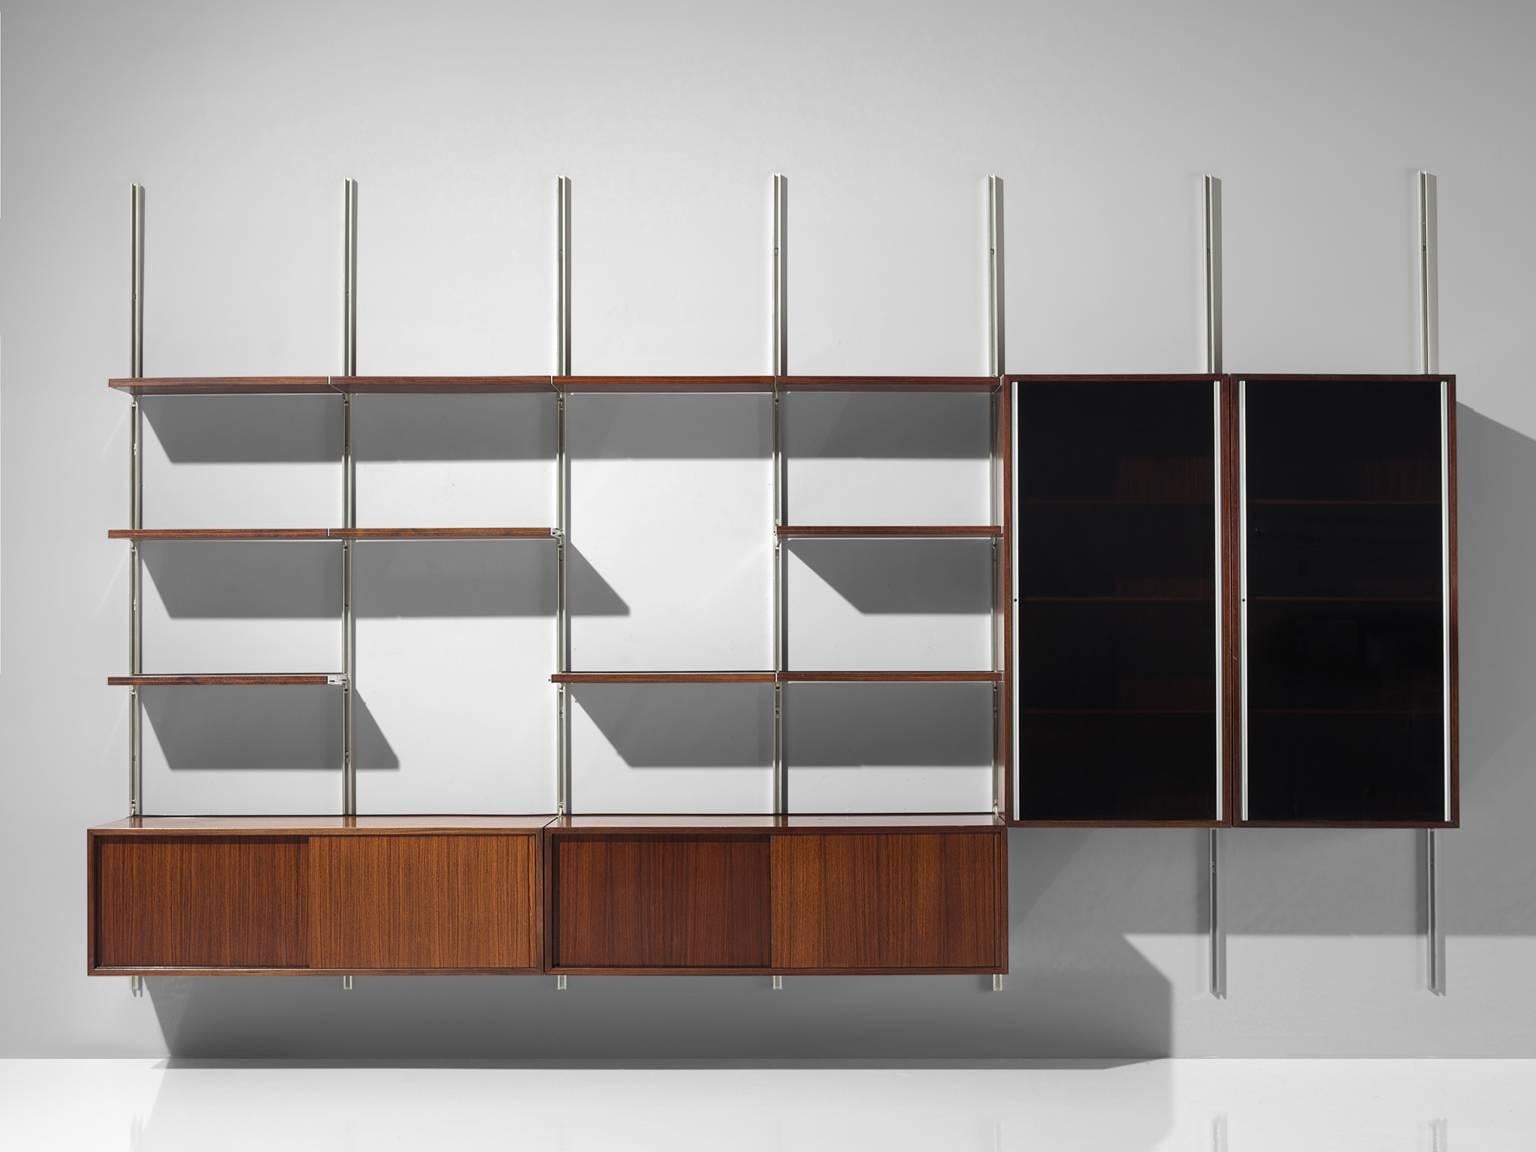 Osvaldo Borsani for Tecno, bookcase or wall unit, in metal and wood, Italy, 1950s.

This wall-mounted shelving unit is six sections large. The order and lay out of this unit is adjustable. According to Osvaldo Borsani the home needs to be orderly,